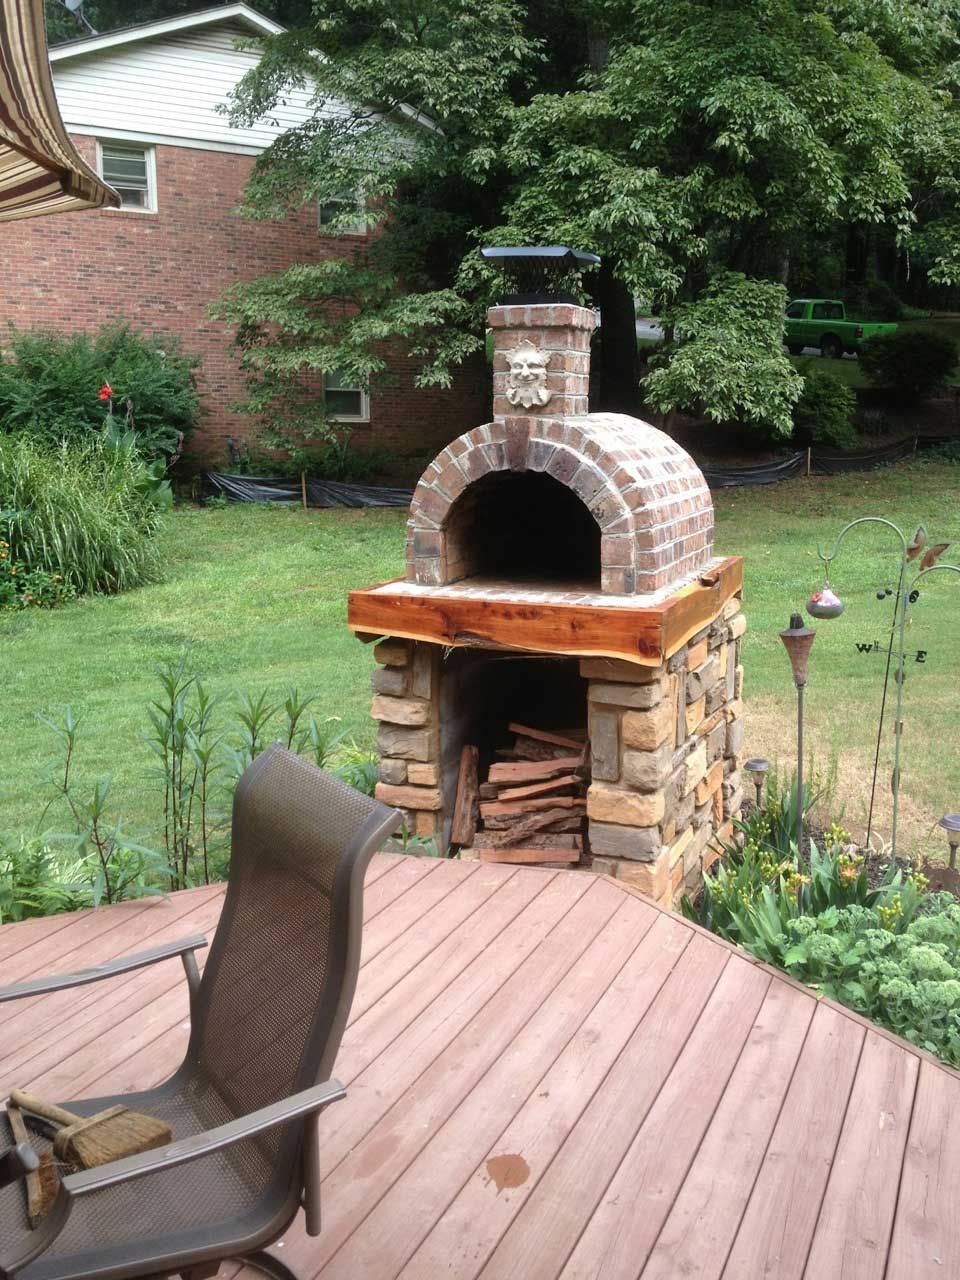 The Various Uses of Pizza Ovens